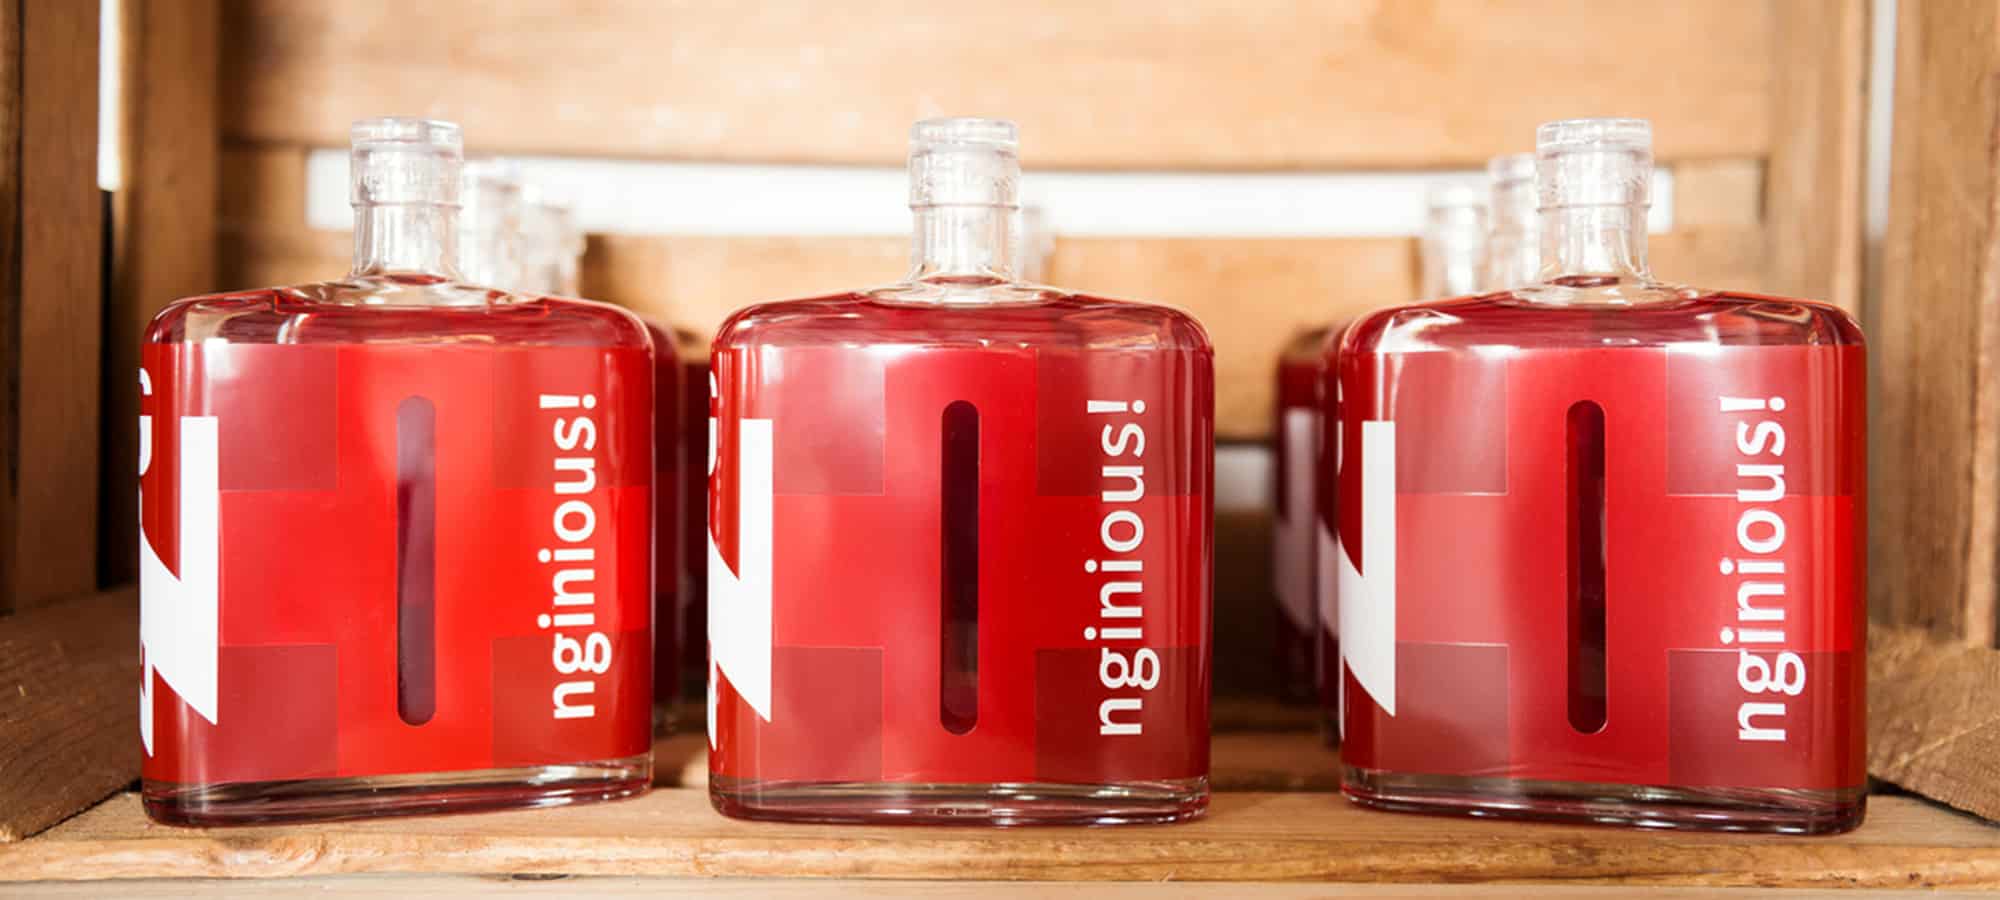 WIN A Bottle Of nginious! Swiss Blended Gin